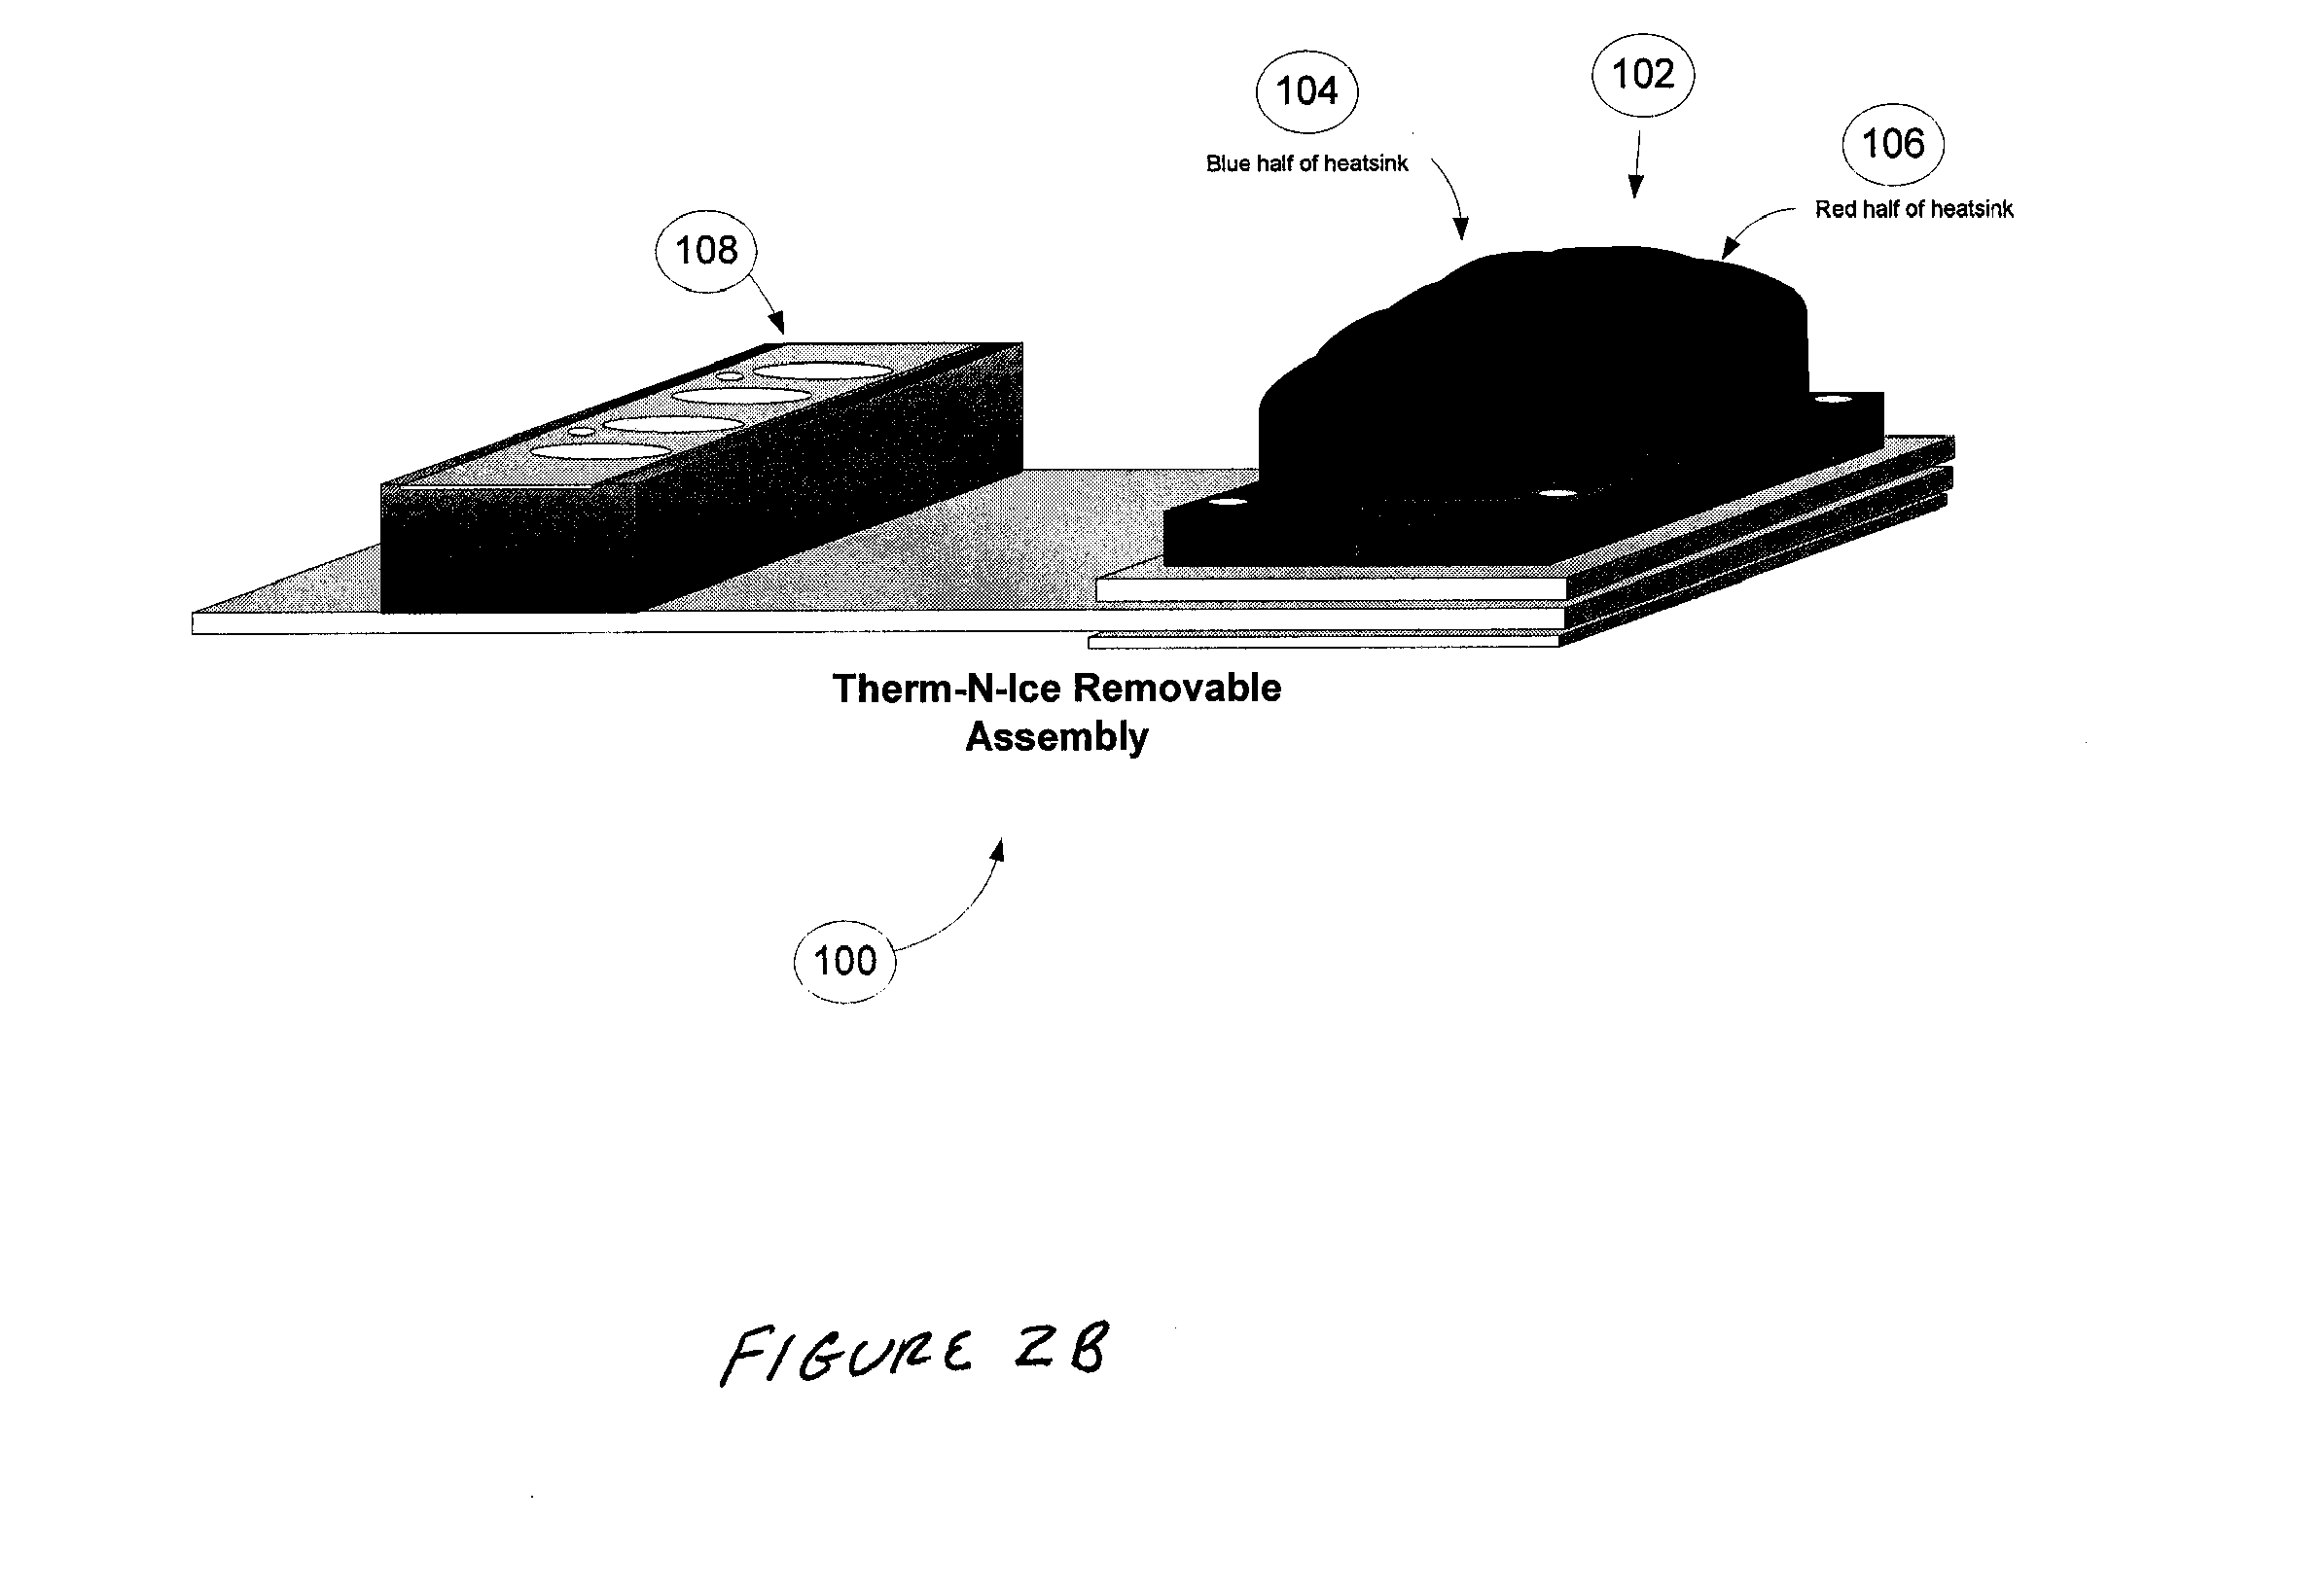 Apparatus for therapeutic cooling and warming of a body portion of a human or mammal